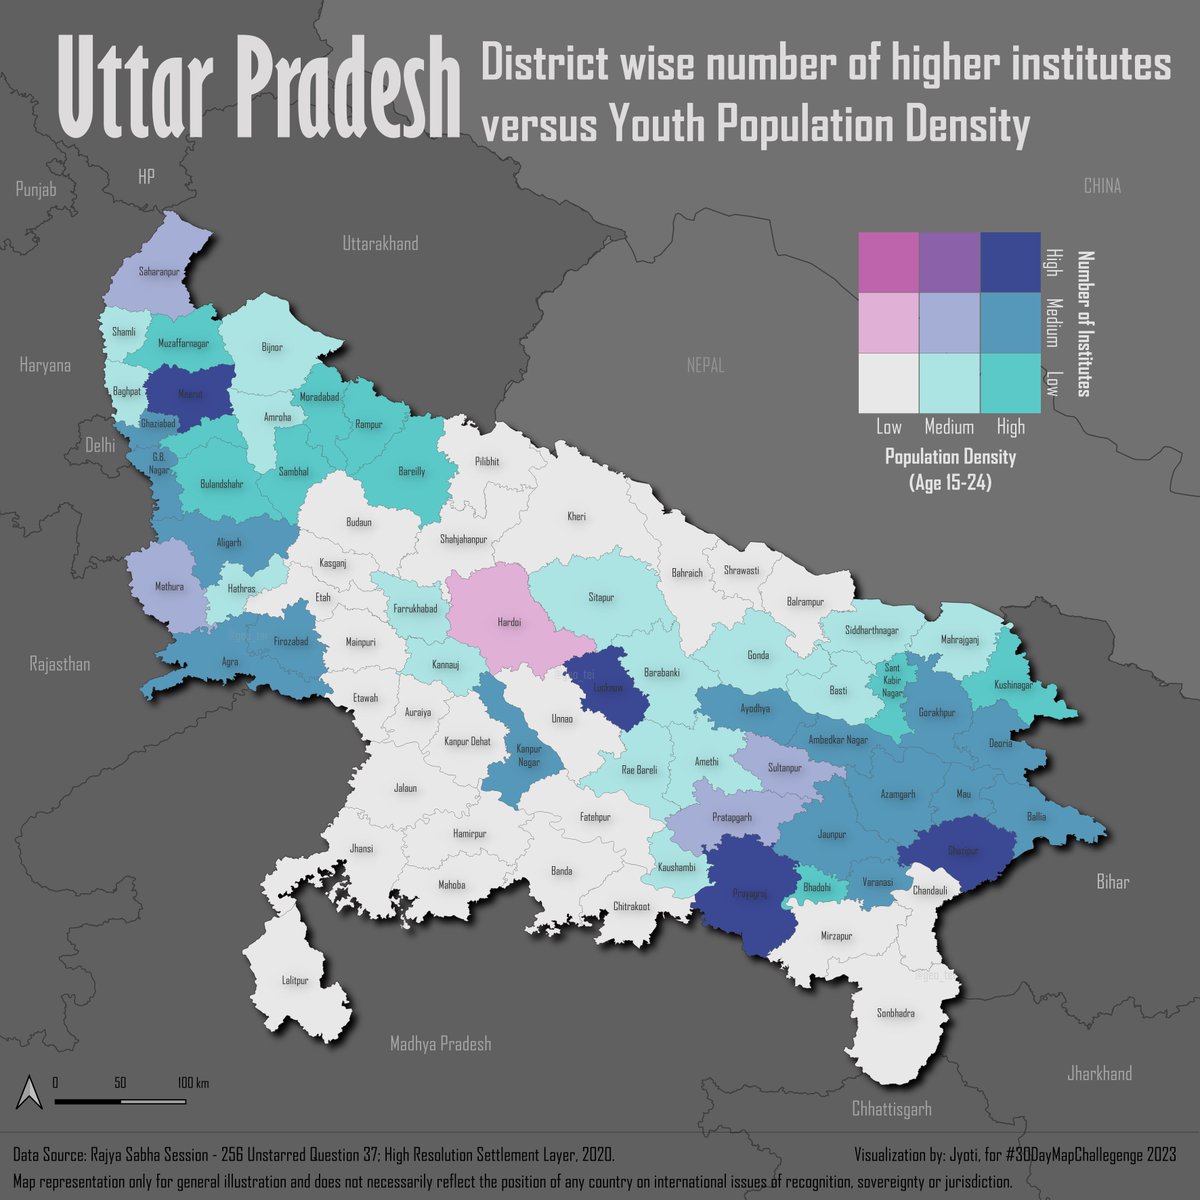 #30DayMapChallenge
Day 13 – Choropleth
#Map is a bivariate choropleth comparing the number of higher institutes with youth (15-24 years of age) population density in the Uttar Pradesh state of India. (1/3)
#gis #geospatial #choropleth #googleearthengine #qgis #highereducation